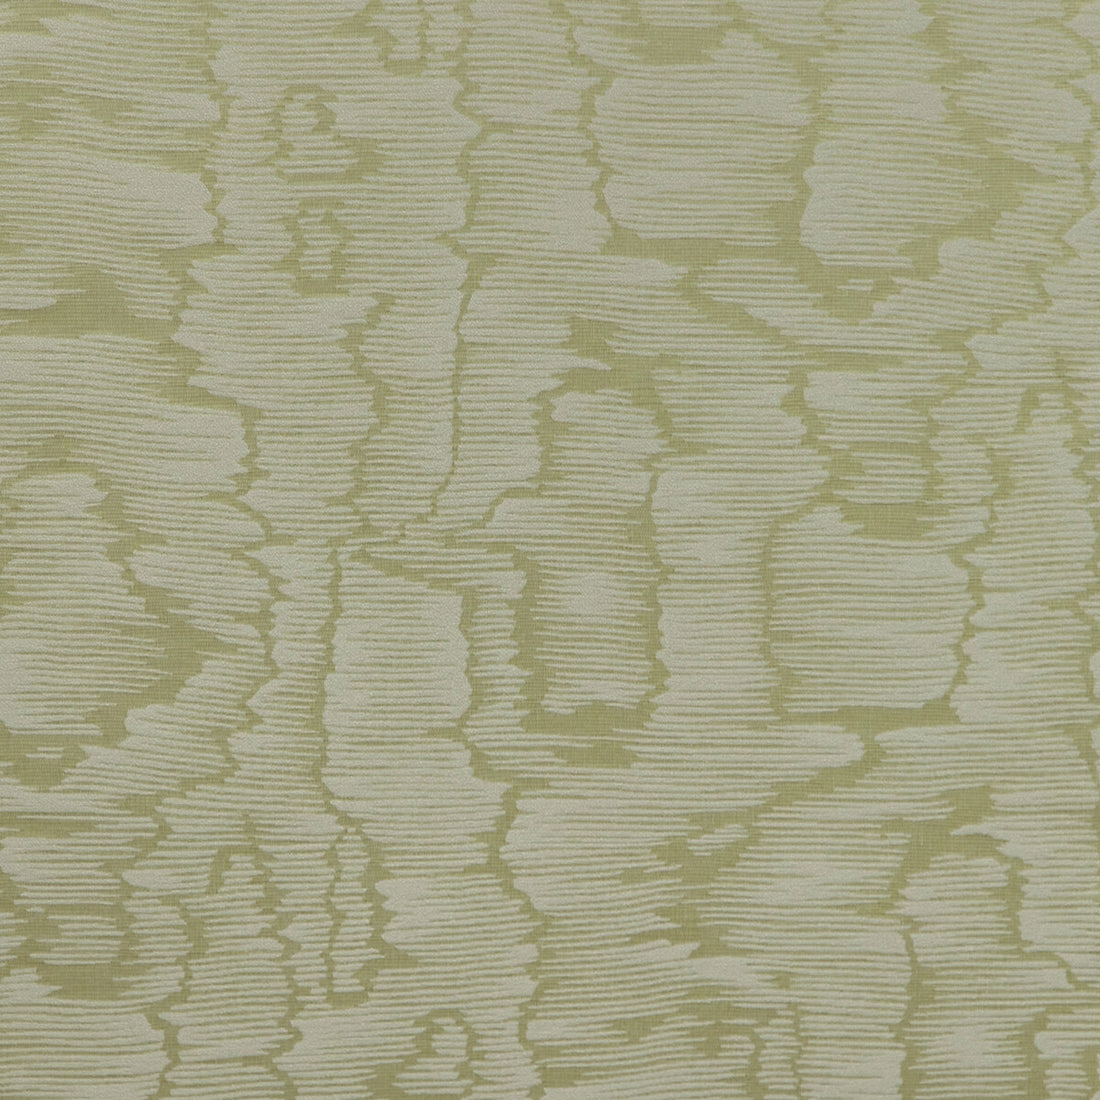 Lyon Weave fabric in leaf color - pattern 8023145.3.0 - by Brunschwig &amp; Fils in the Vienne Silks collection